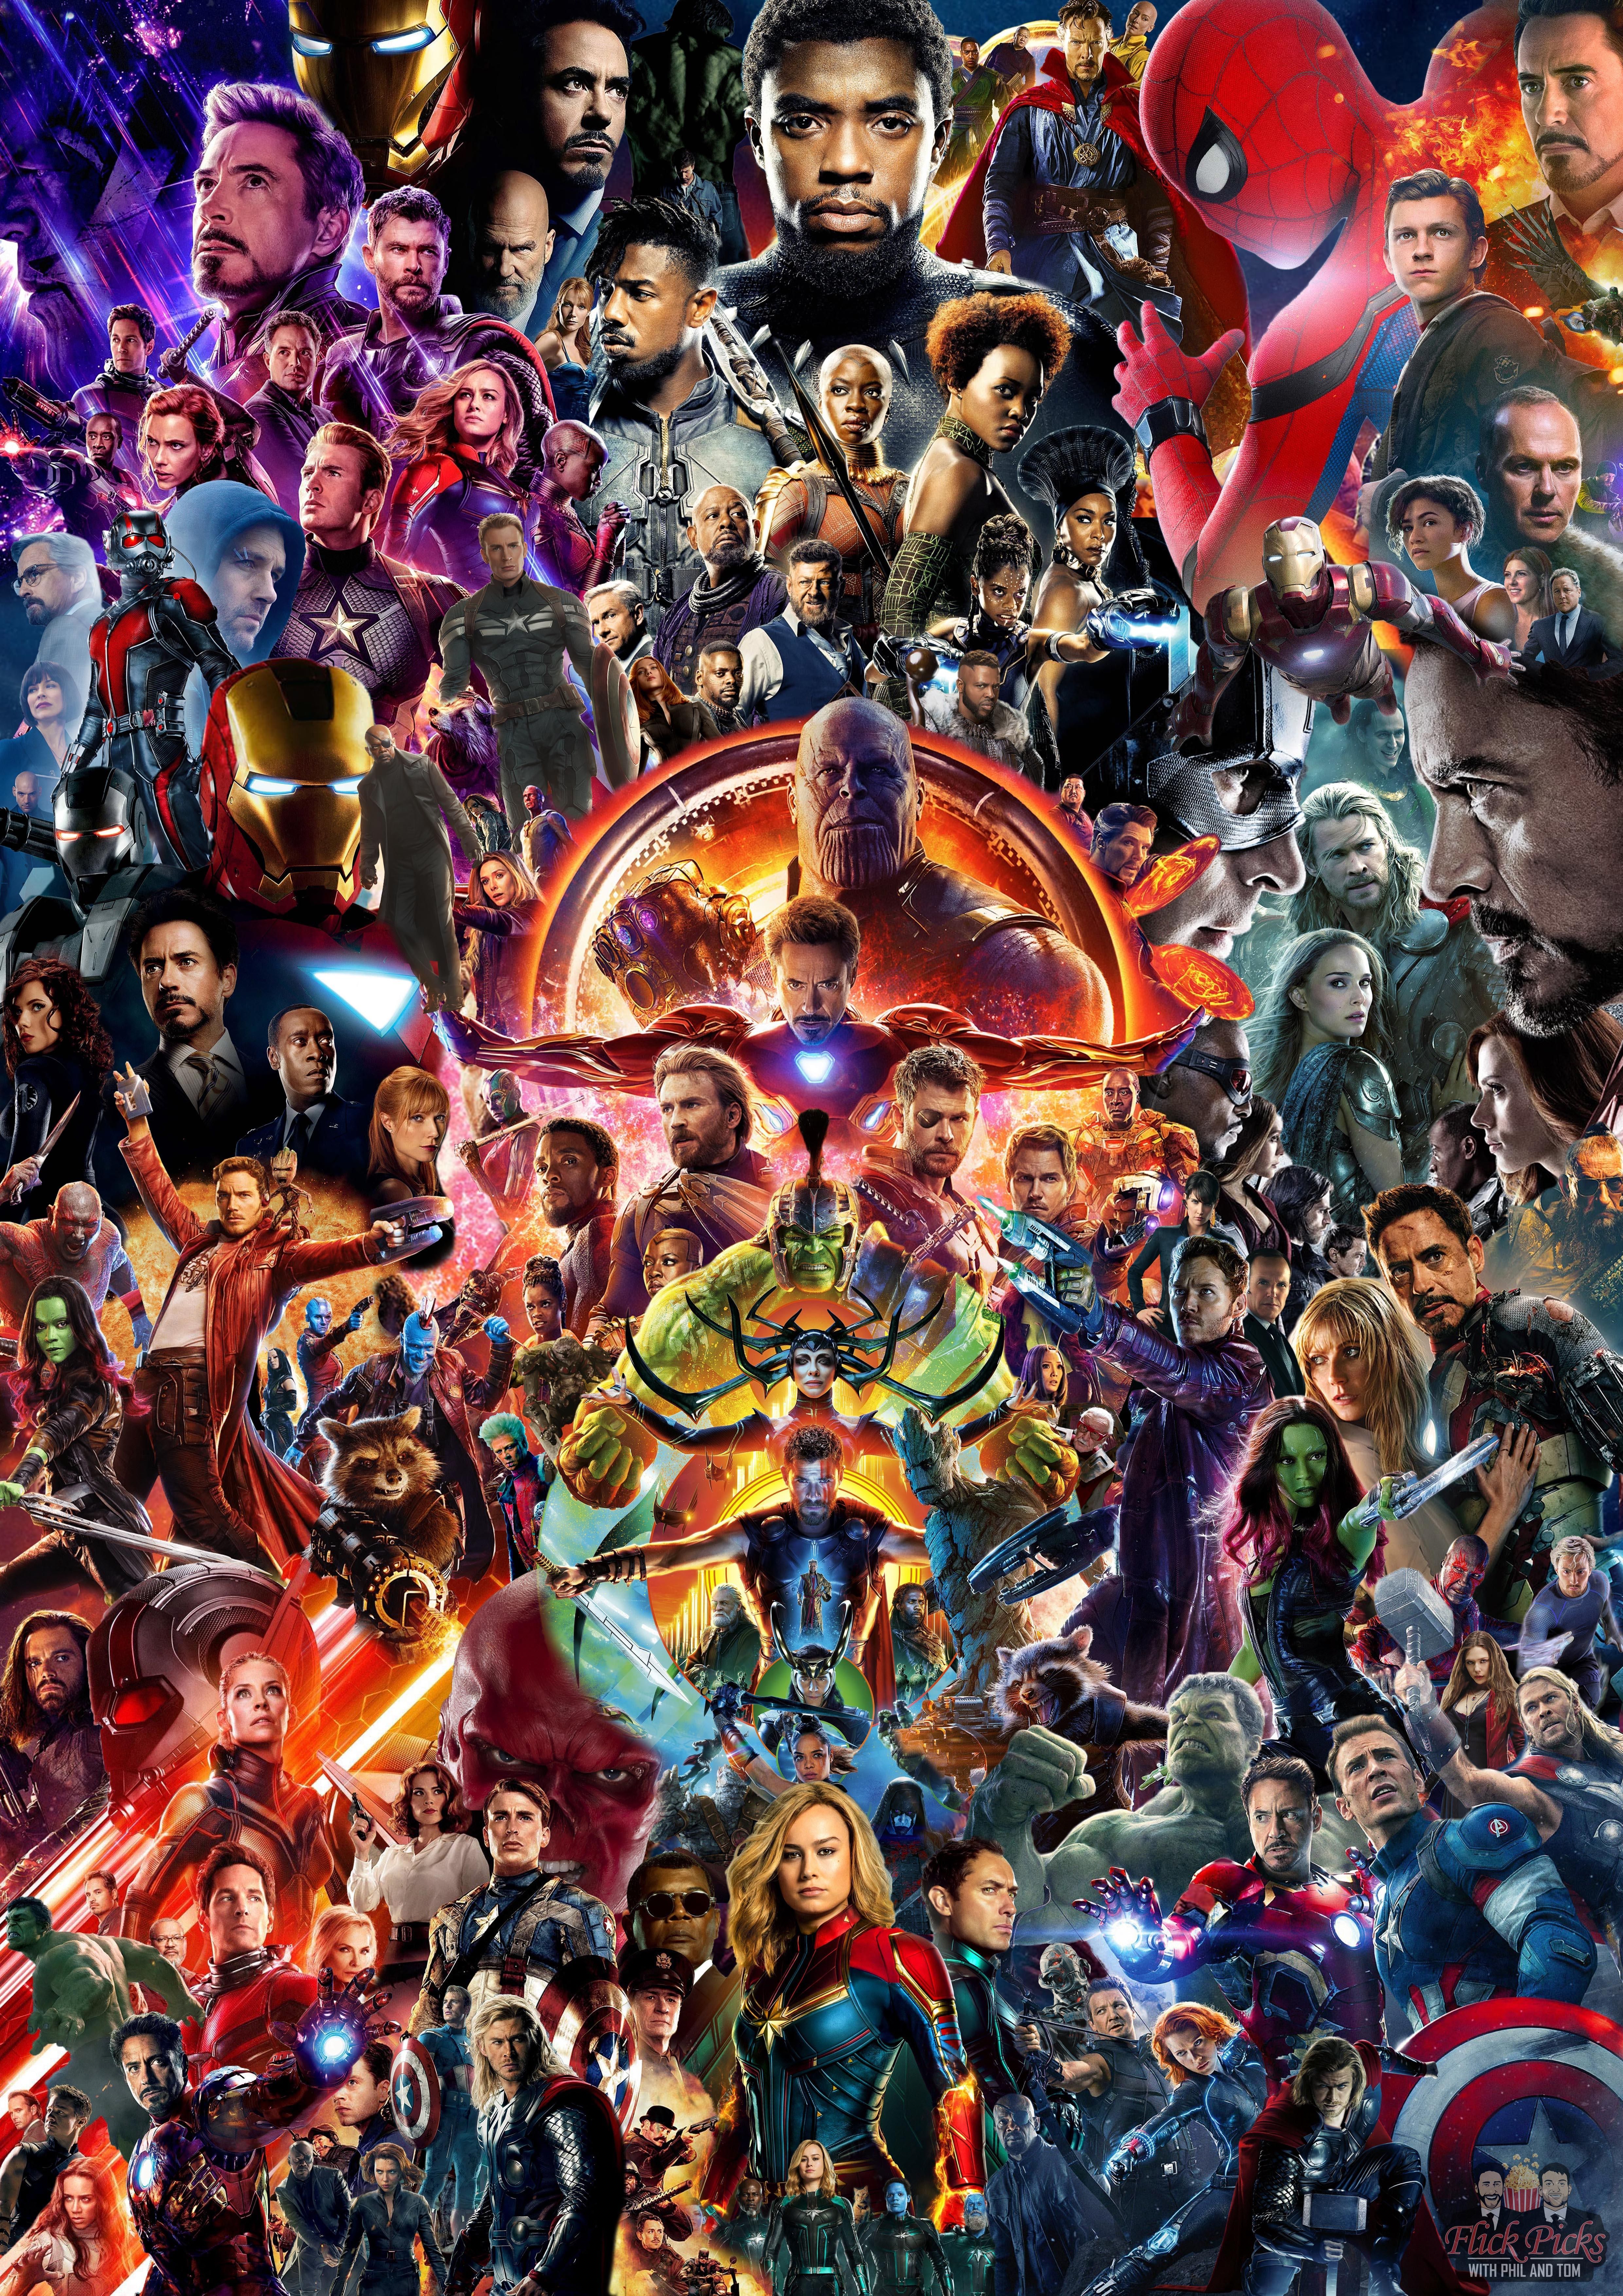 The Infinity Saga Poster (My Updated Artwork: Including All 22 MCU Film Posters), marvelstudios. Marvel posters, Marvel wallpaper, Marvel artwork